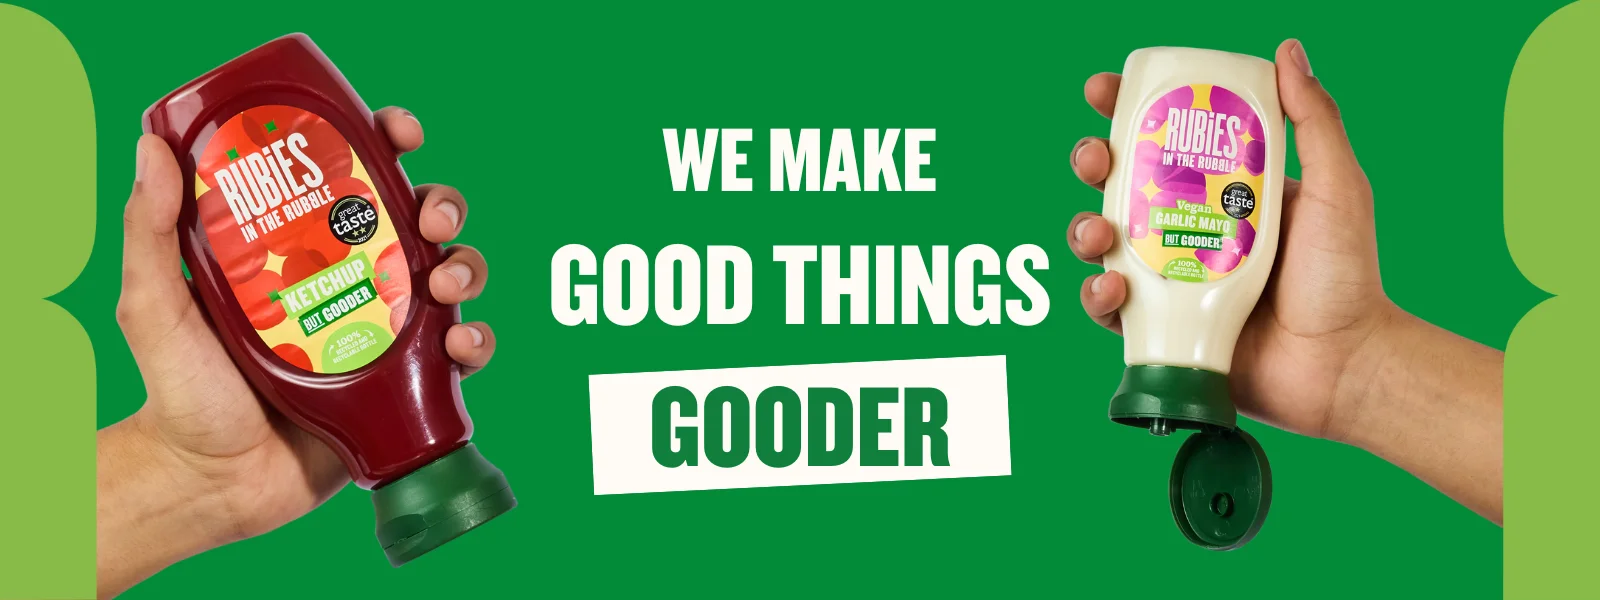 A banner with two hands holding Rubies in the Rubble Ketchup and Rubies in the Rubble Mayo with text in the middle saying 'we make good things gooder'.